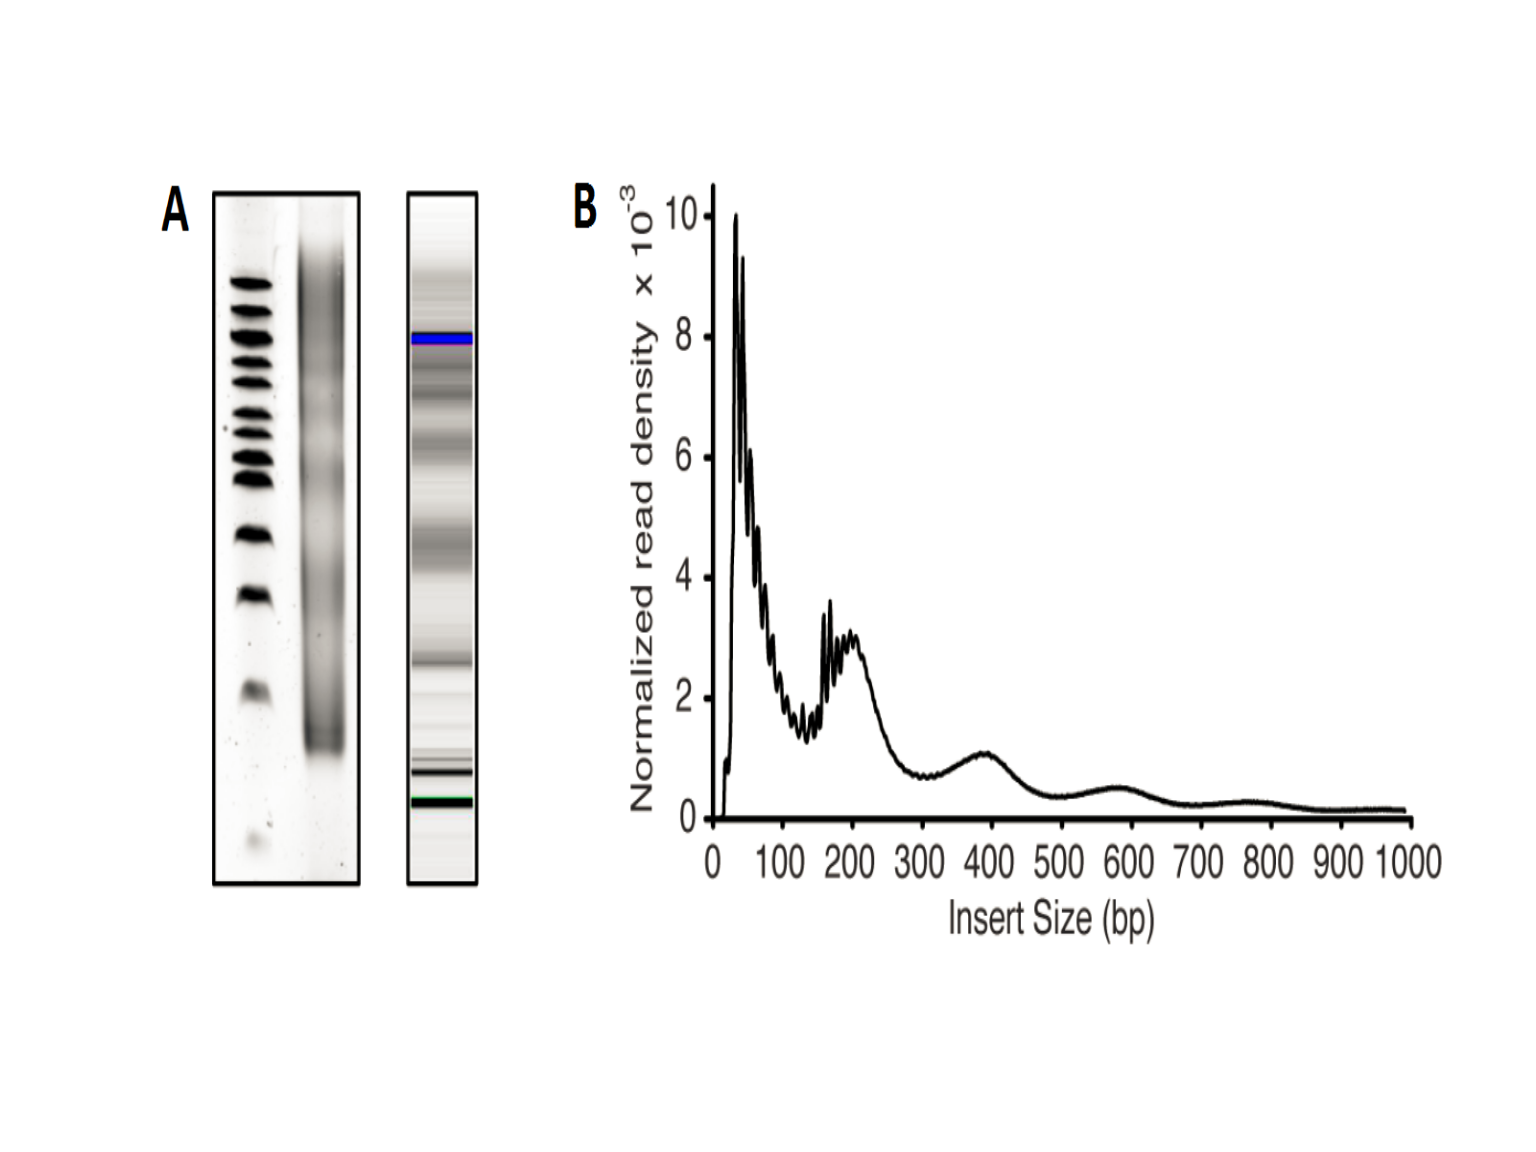 Figure 7. Library insert fragment size distribution in a typical ATAC-seq assay.